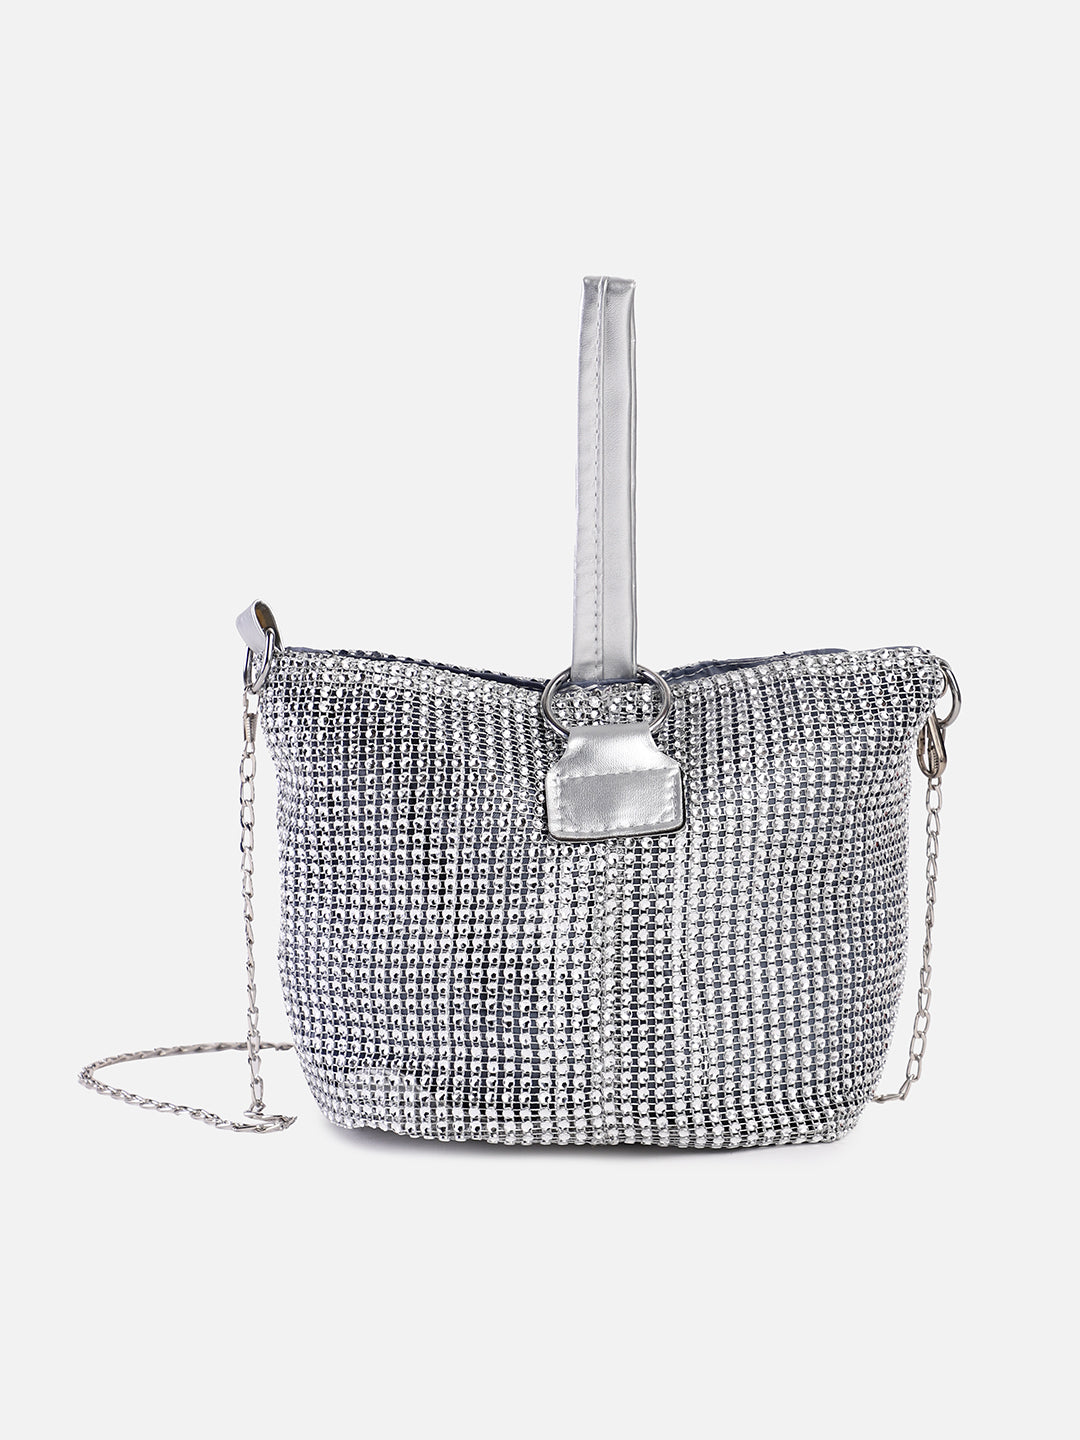 Hilary Silver Tote Bag